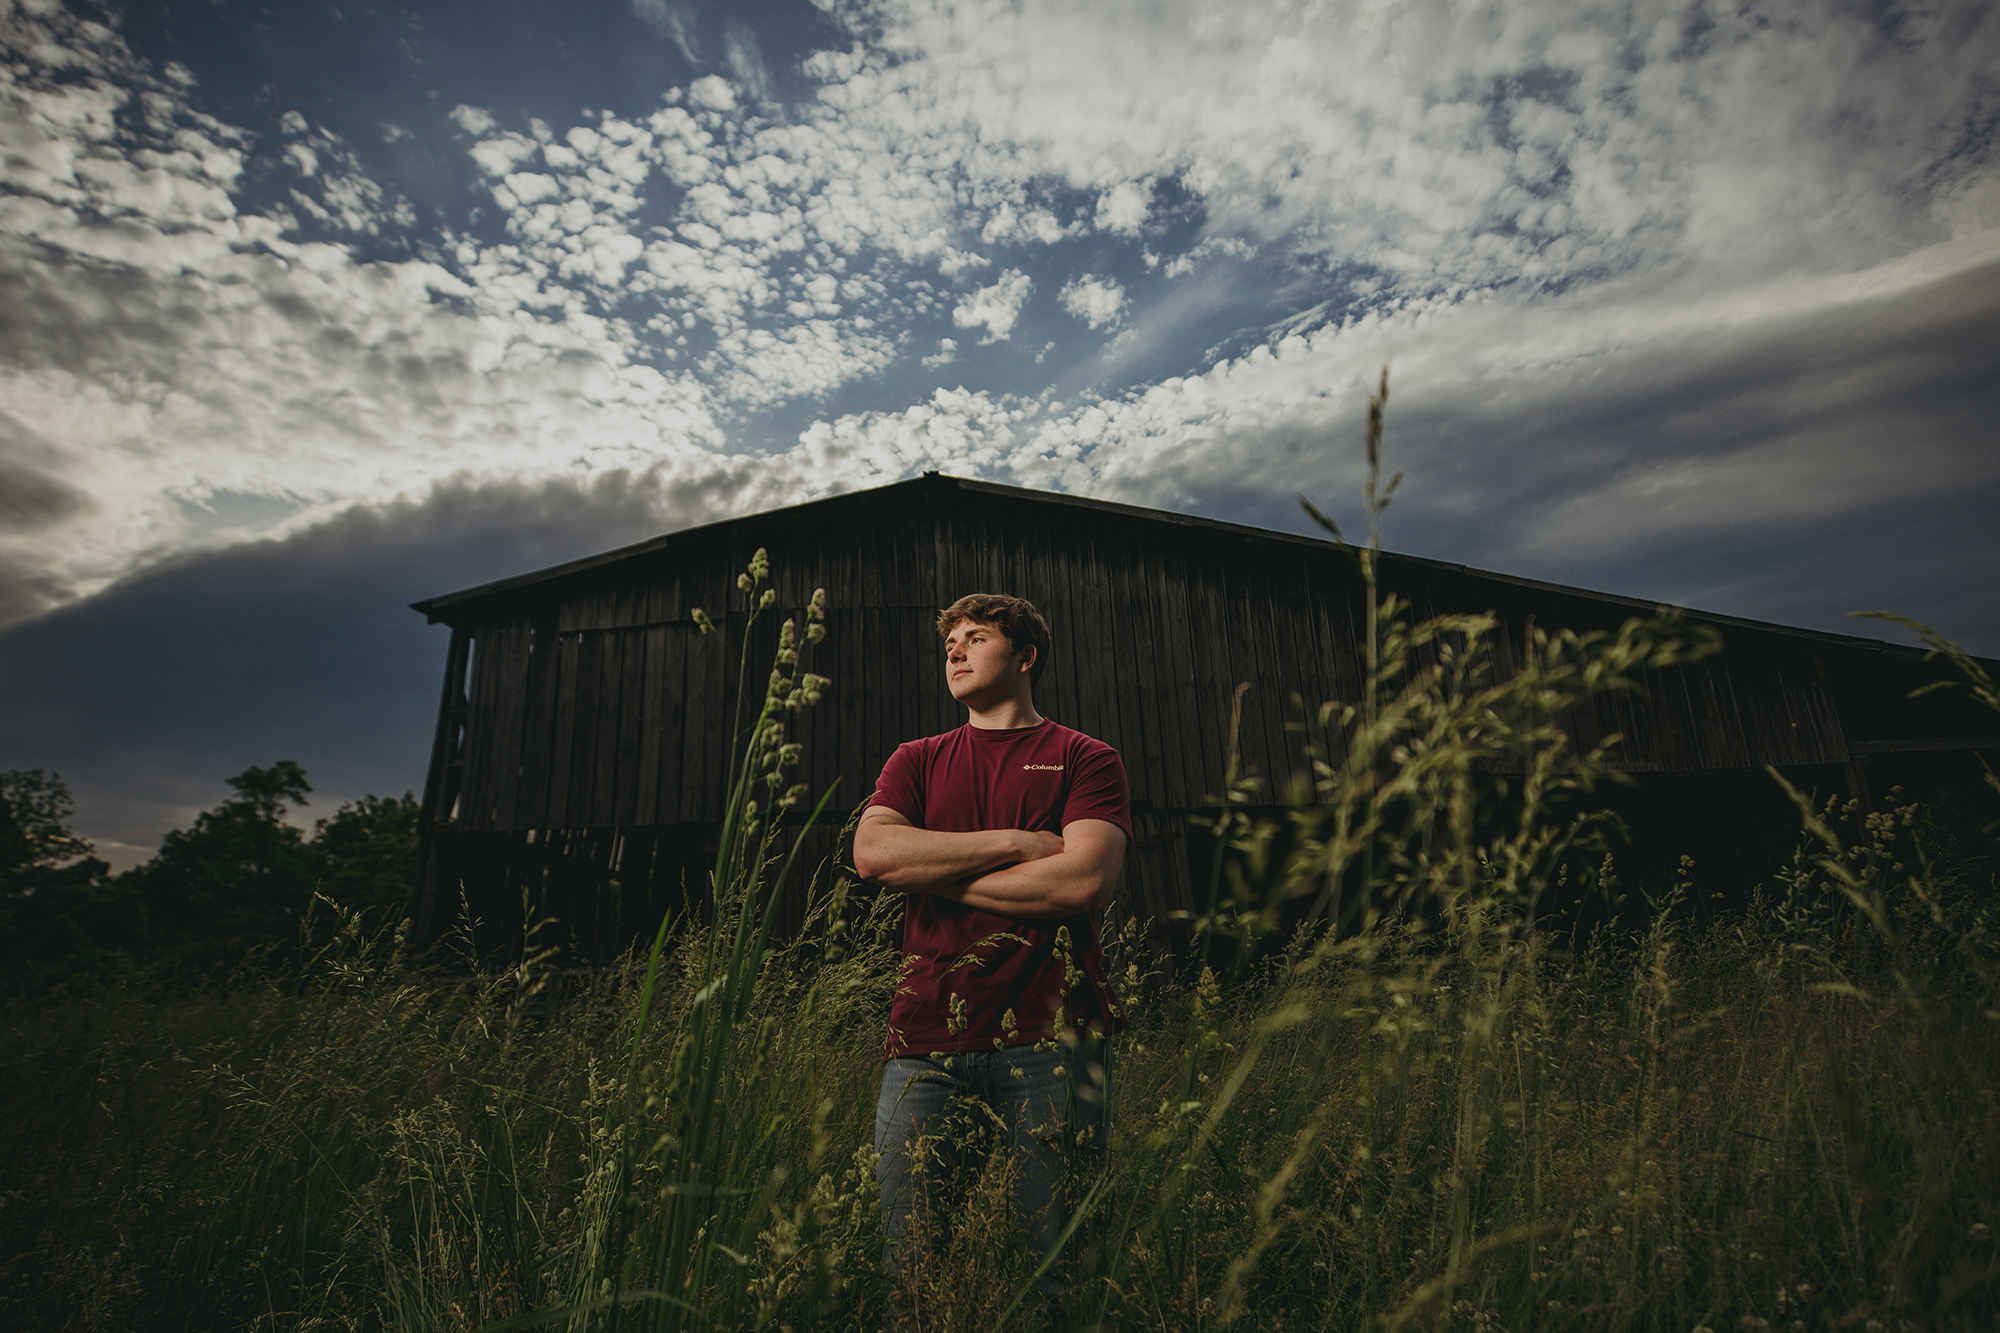 country senior boy with arms crossed in a farm field with tall grass and a barn in the background